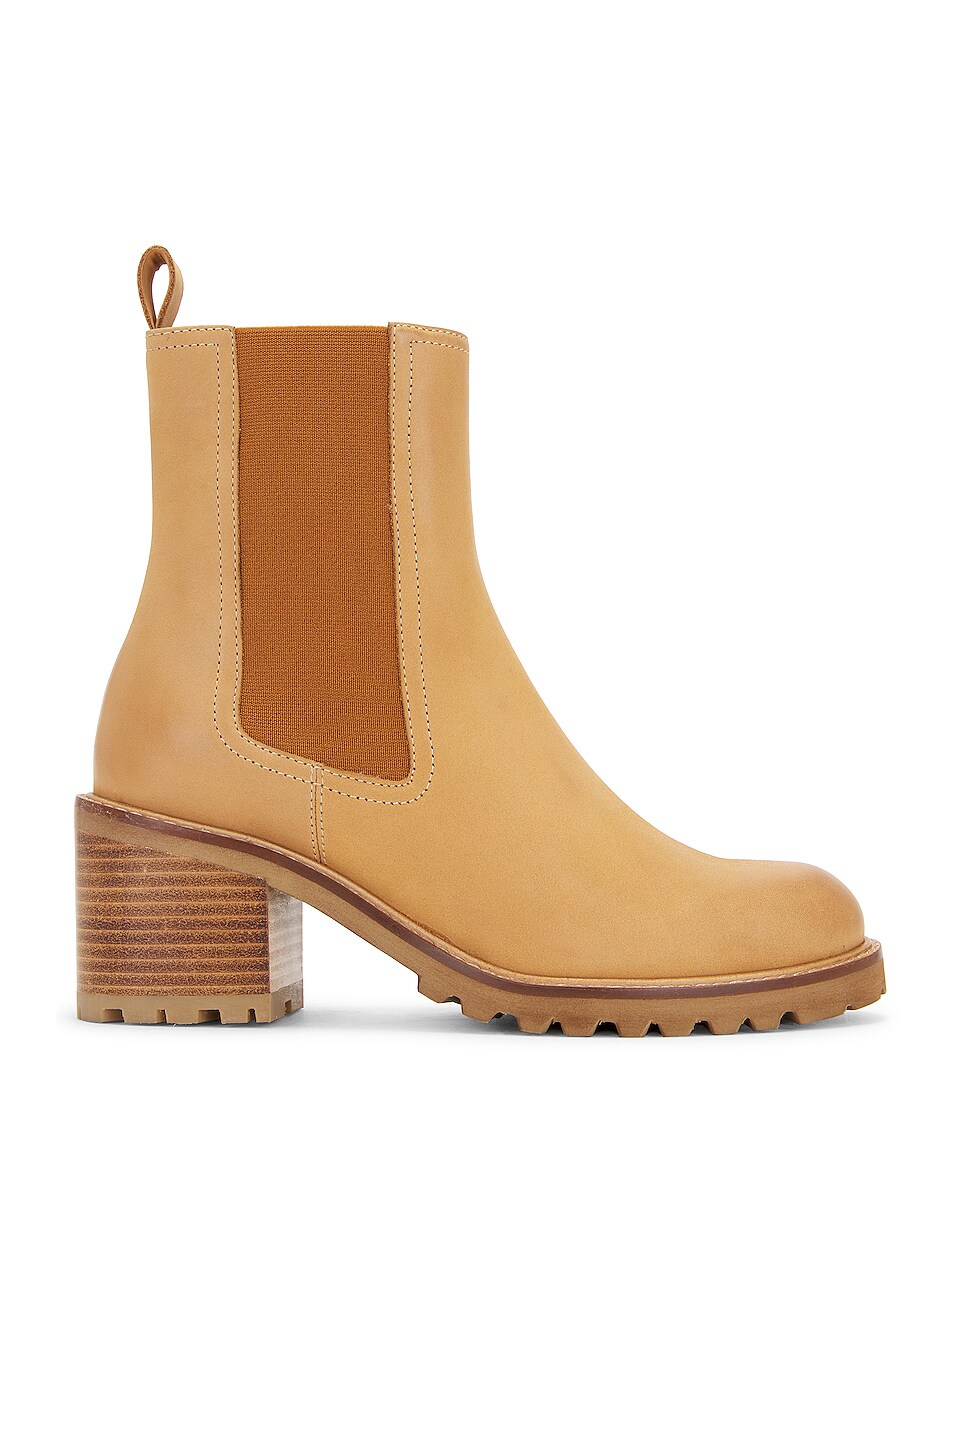 Image 1 of Far Fetched Bootie in Tan Nubuck